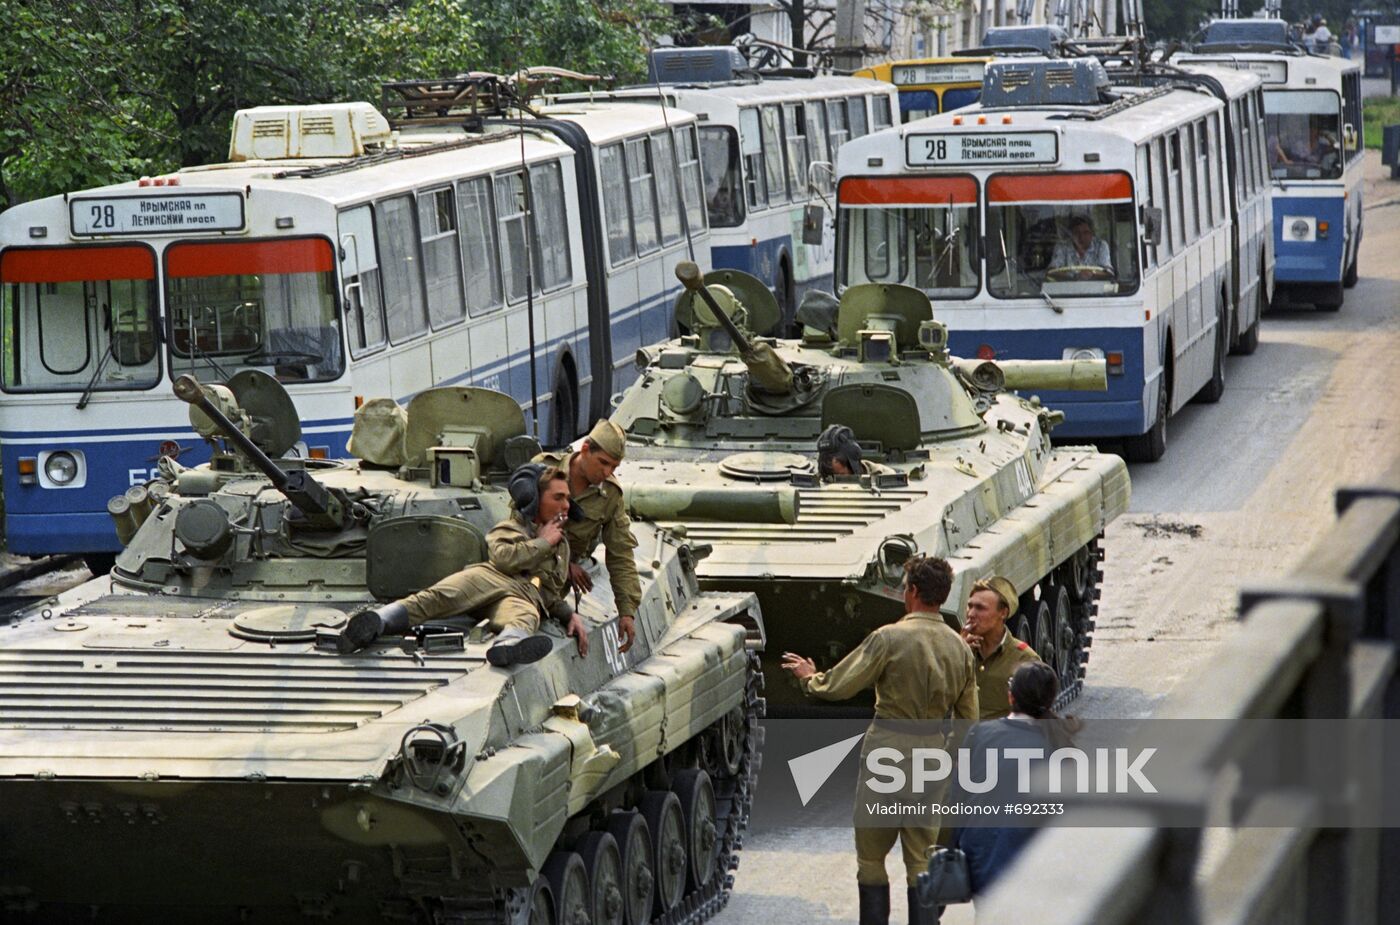 Military forces enter Moscow on August 19, 1991